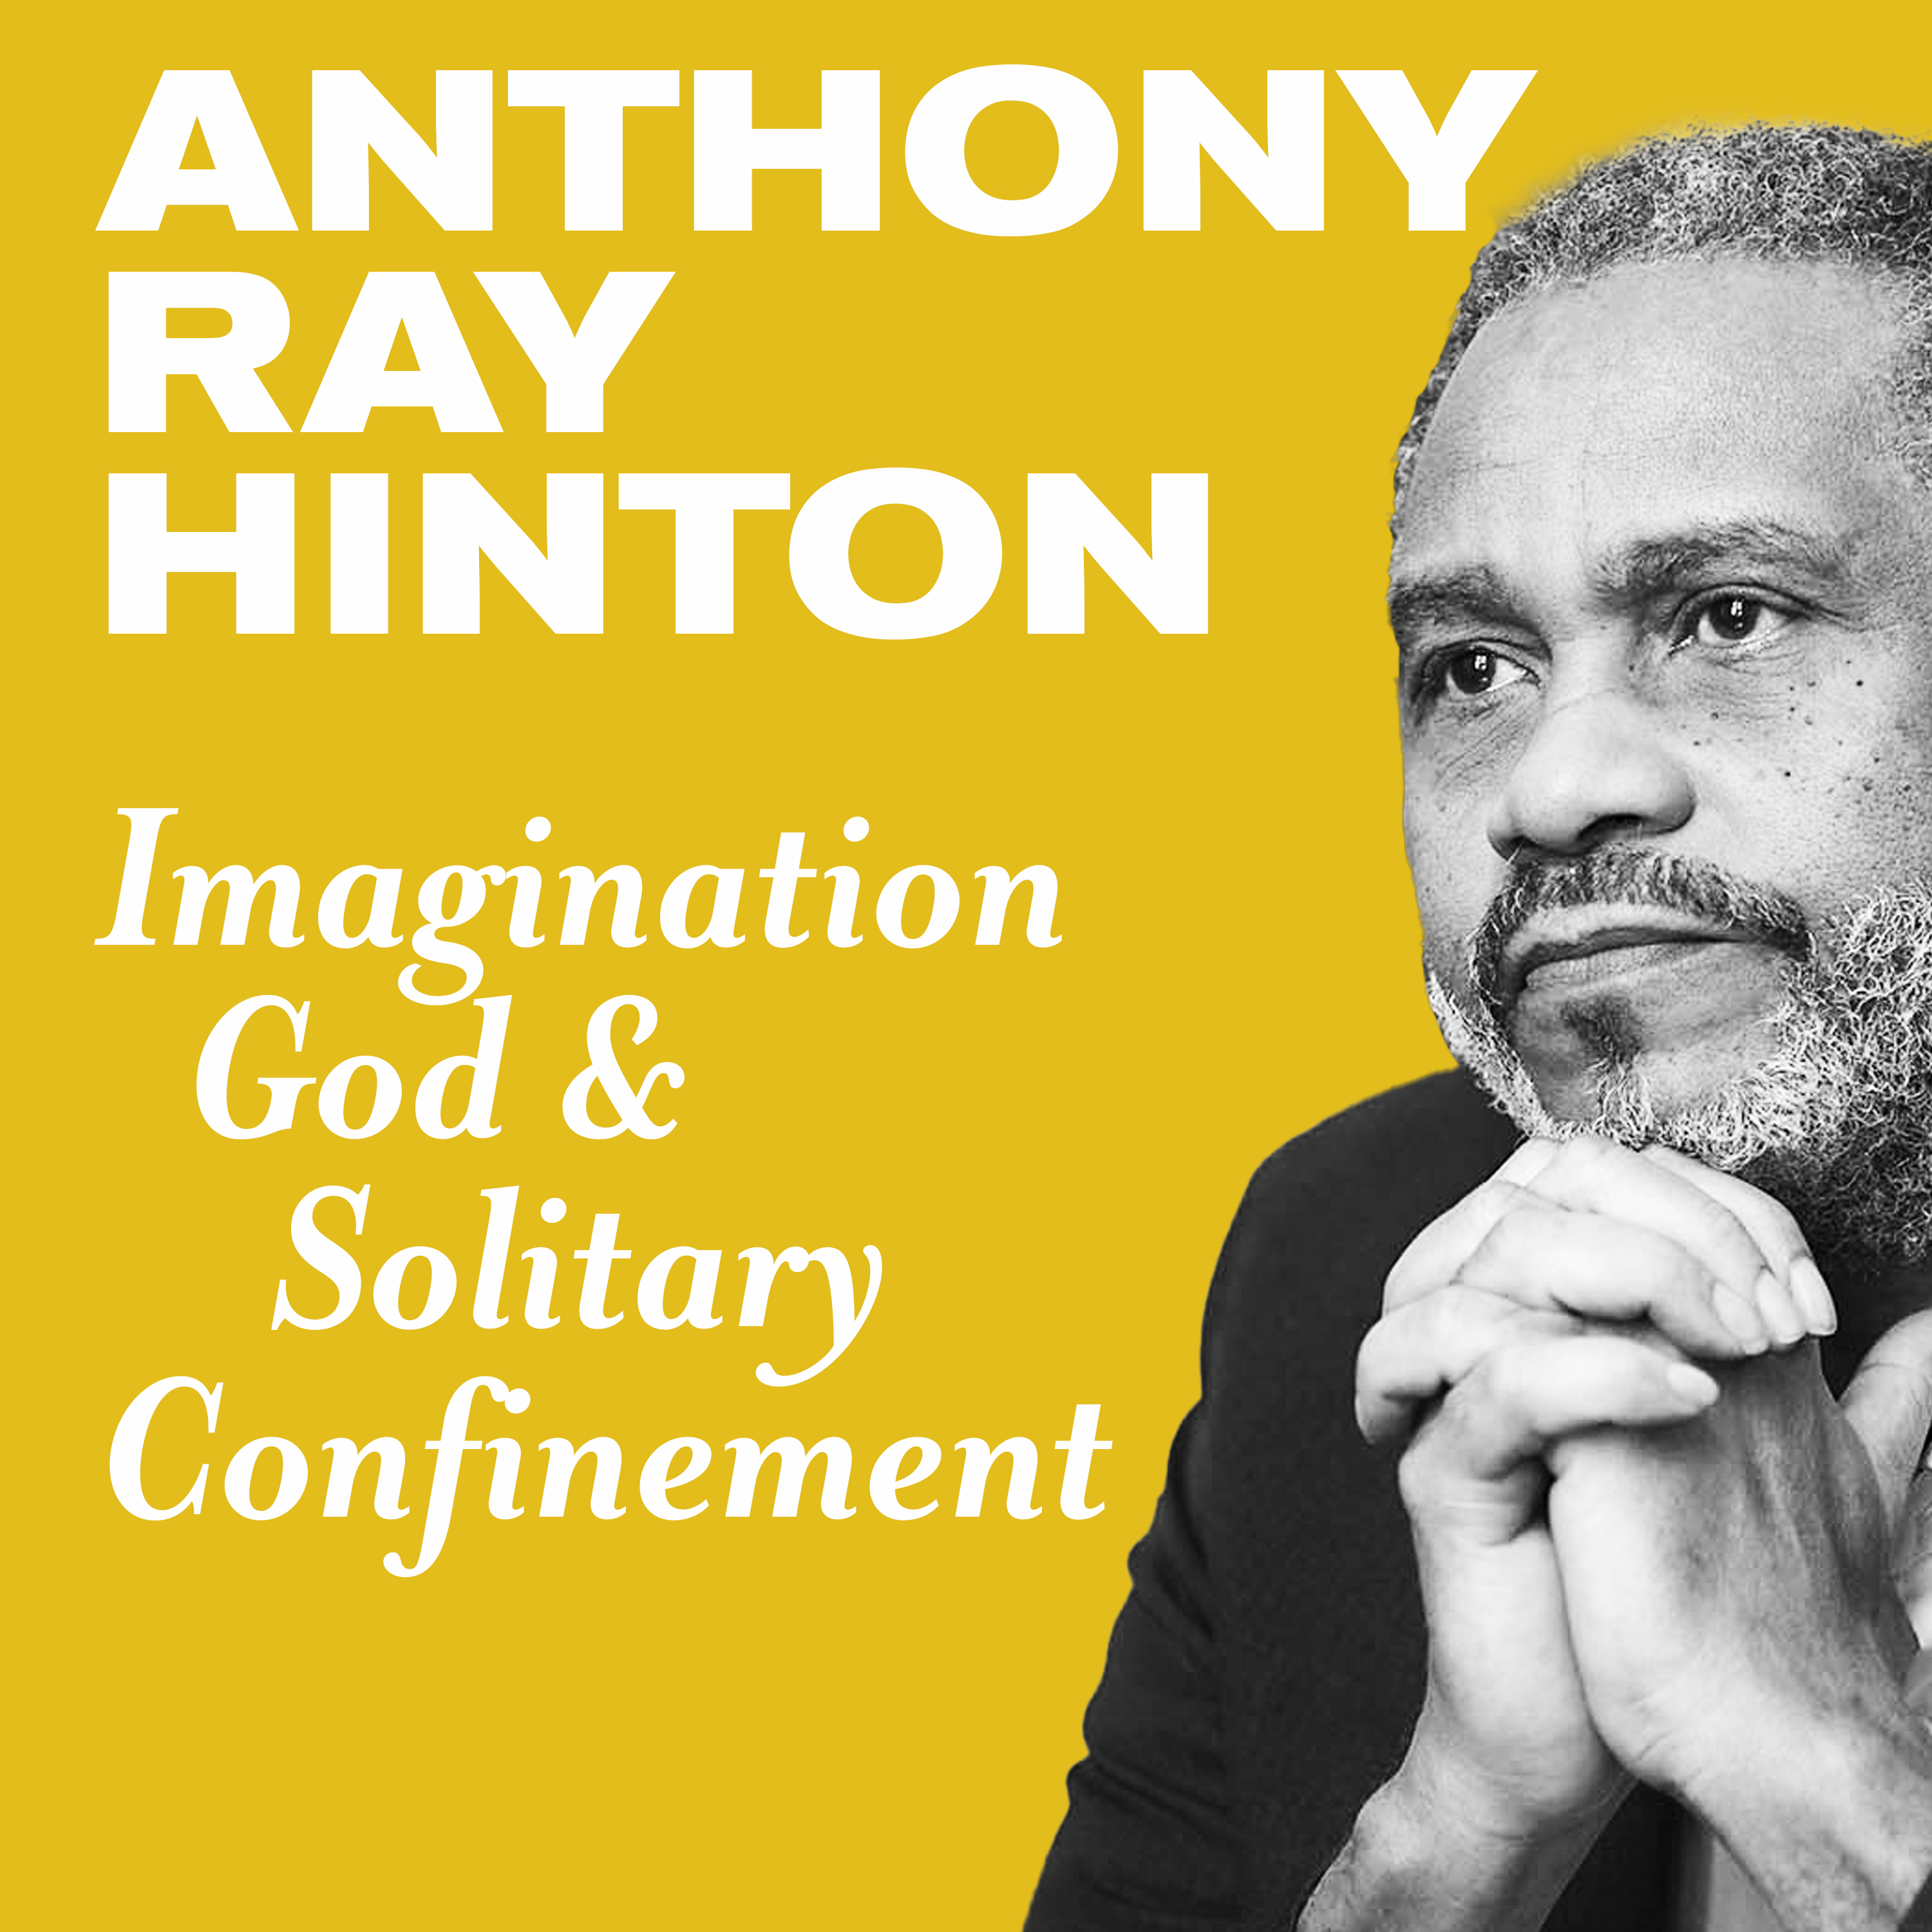 Anthony Ray Hinton on Imagination, God and Solitary Confinement